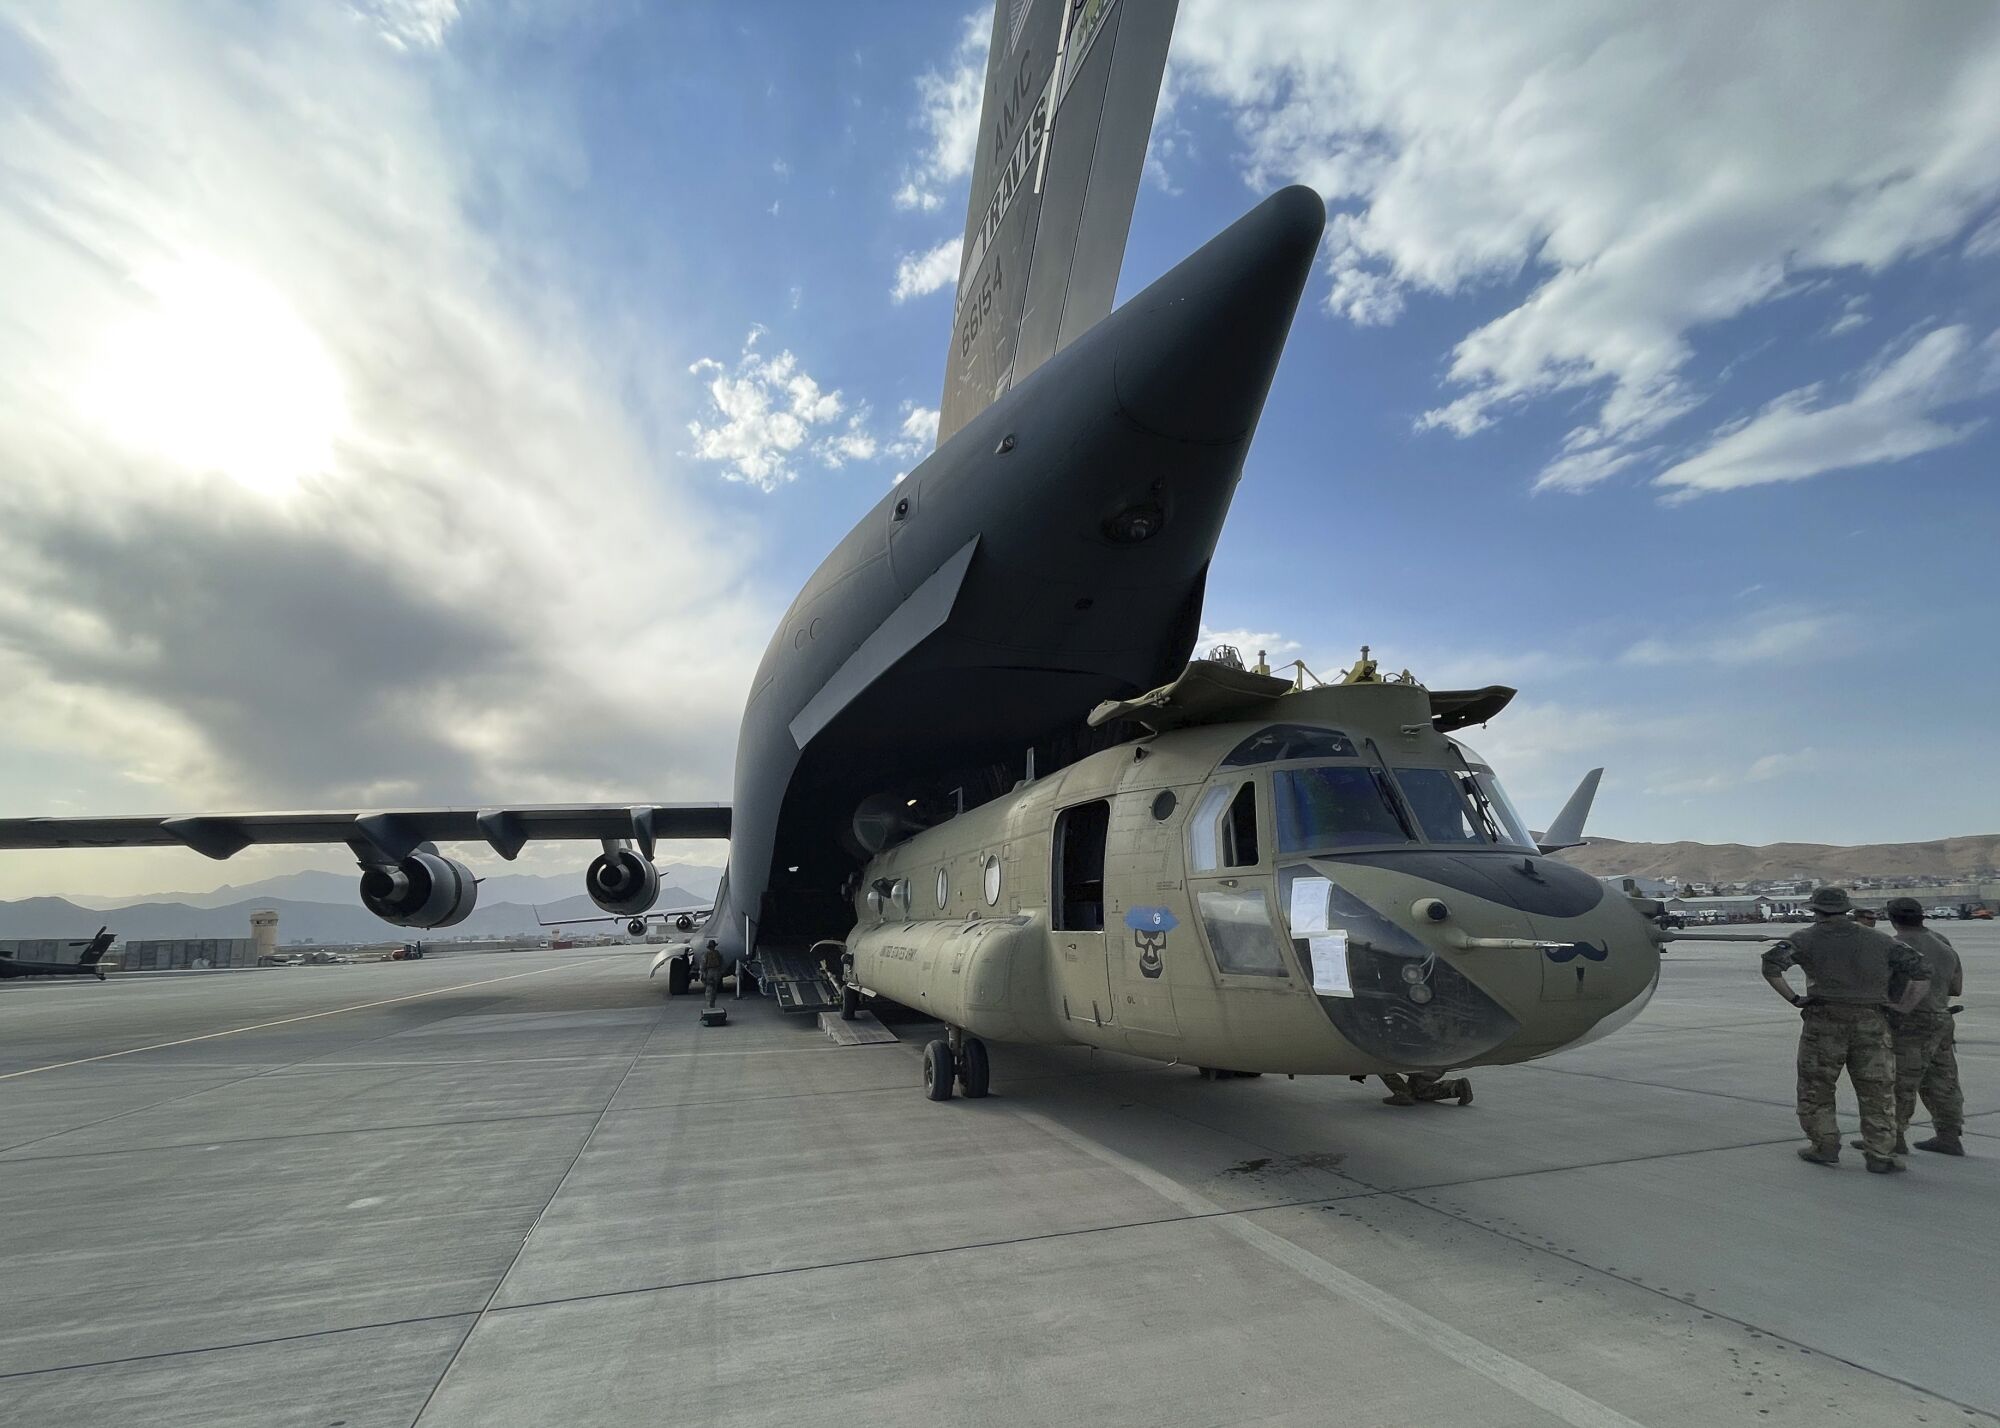 A CH-47 Chinook from the 82nd Combat Aviation Brigade, 82nd Airborne Division is loaded onto a U.S. Air Force C-17 